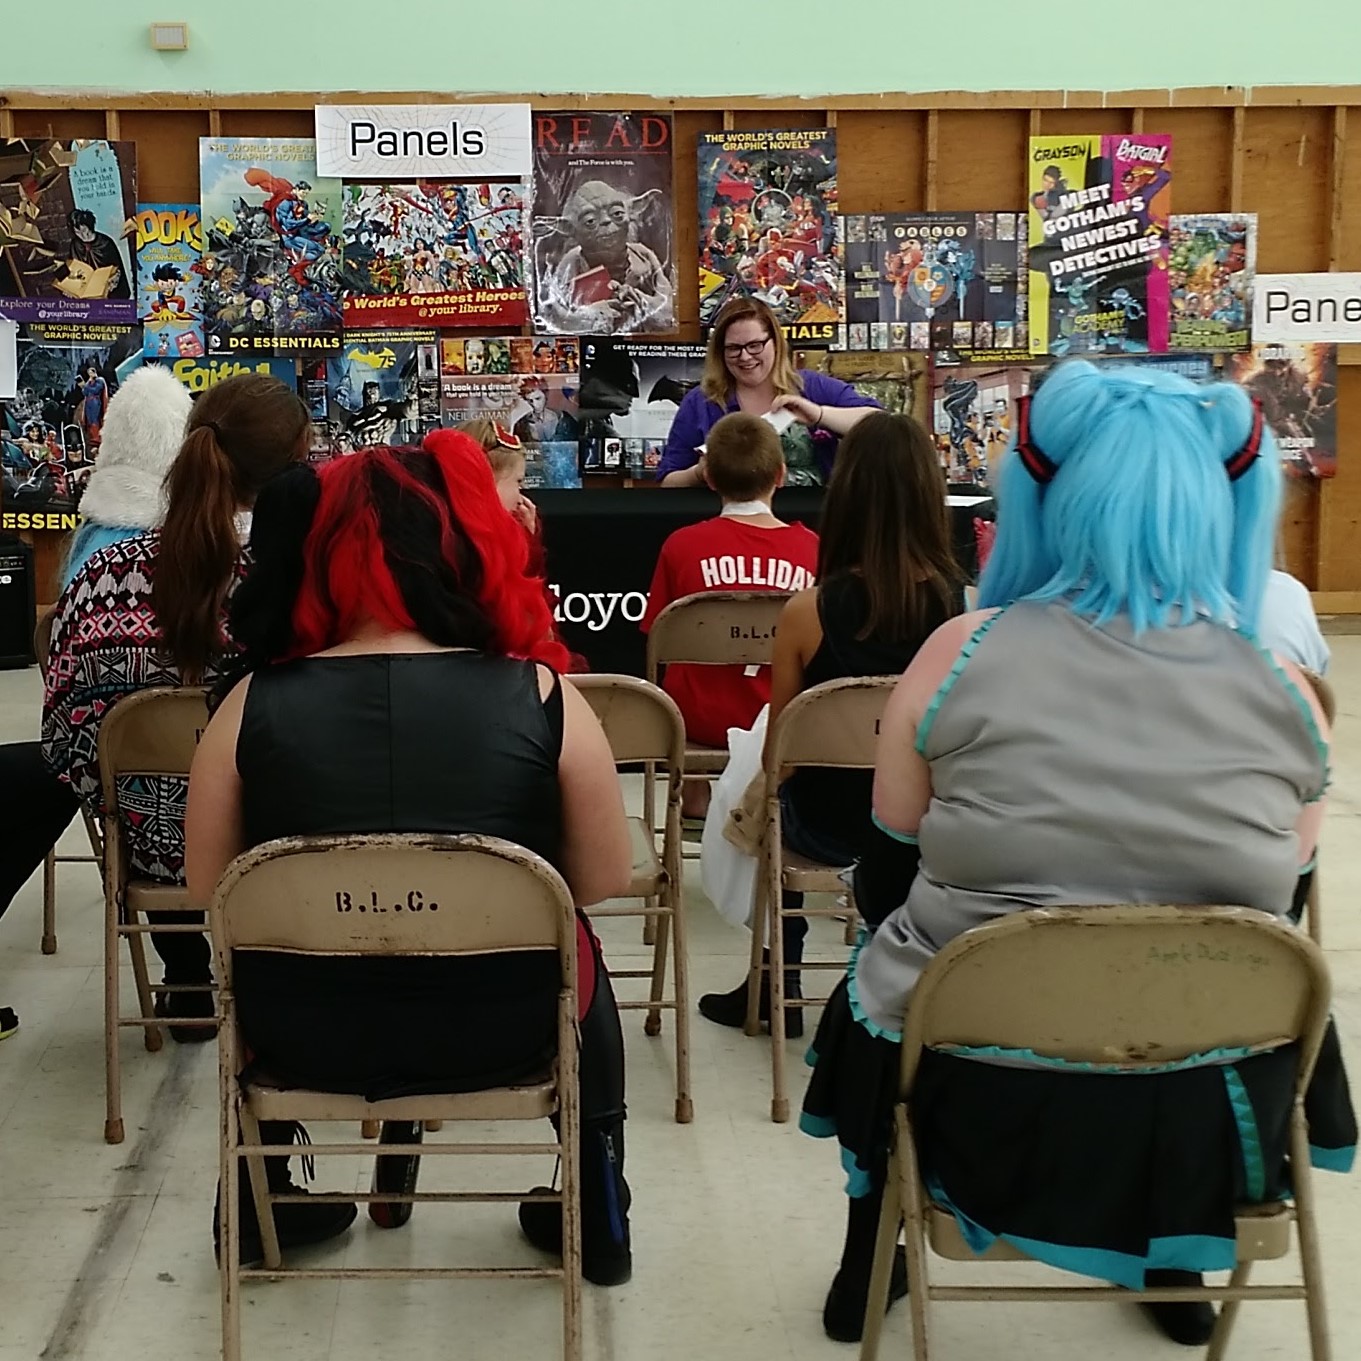 An art panel at our con.